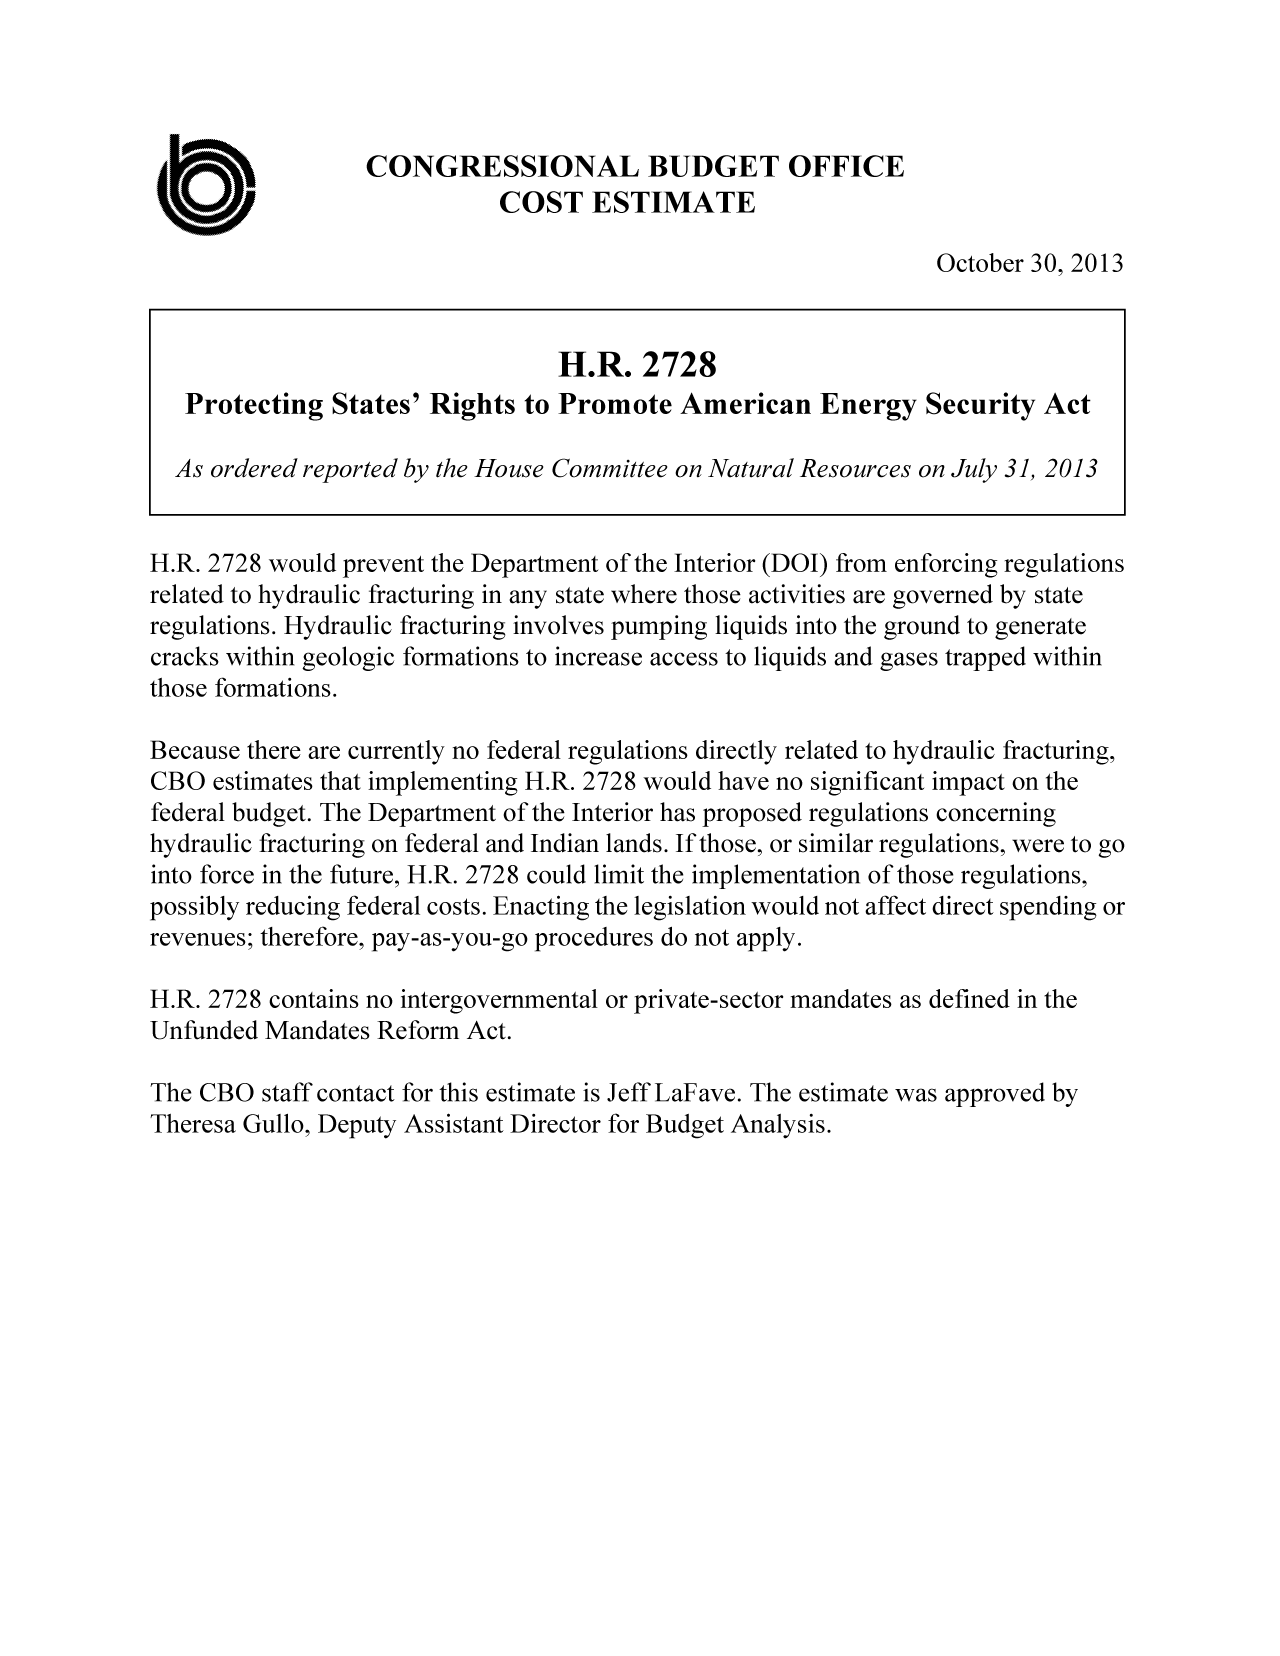 handle is hein.congrec/cbo11364 and id is 1 raw text is: CONGRESSIONAL BUDGET OFFICE
COST ESTIMATE
October 30, 2013
H.R. 2728
Protecting States' Rights to Promote American Energy Security Act
As ordered reported by the House Committee on Natural Resources on July 3], 2013
H.R. 2728 would prevent the Department of the Interior (DOI) from enforcing regulations
related to hydraulic fracturing in any state where those activities are governed by state
regulations. Hydraulic fracturing involves pumping liquids into the ground to generate
cracks within geologic formations to increase access to liquids and gases trapped within
those formations.
Because there are currently no federal regulations directly related to hydraulic fracturing,
CBO estimates that implementing H.R. 2728 would have no significant impact on the
federal budget. The Department of the Interior has proposed regulations concerning
hydraulic fracturing on federal and Indian lands. If those, or similar regulations, were to go
into force in the future, H.R. 2728 could limit the implementation of those regulations,
possibly reducing federal costs. Enacting the legislation would not affect direct spending or
revenues; therefore, pay-as-you-go procedures do not apply.
H.R. 2728 contains no intergovernmental or private-sector mandates as defined in the
Unfunded Mandates Reform Act.
The CBO staff contact for this estimate is Jeff LaFave. The estimate was approved by
Theresa Gullo, Deputy Assistant Director for Budget Analysis.


